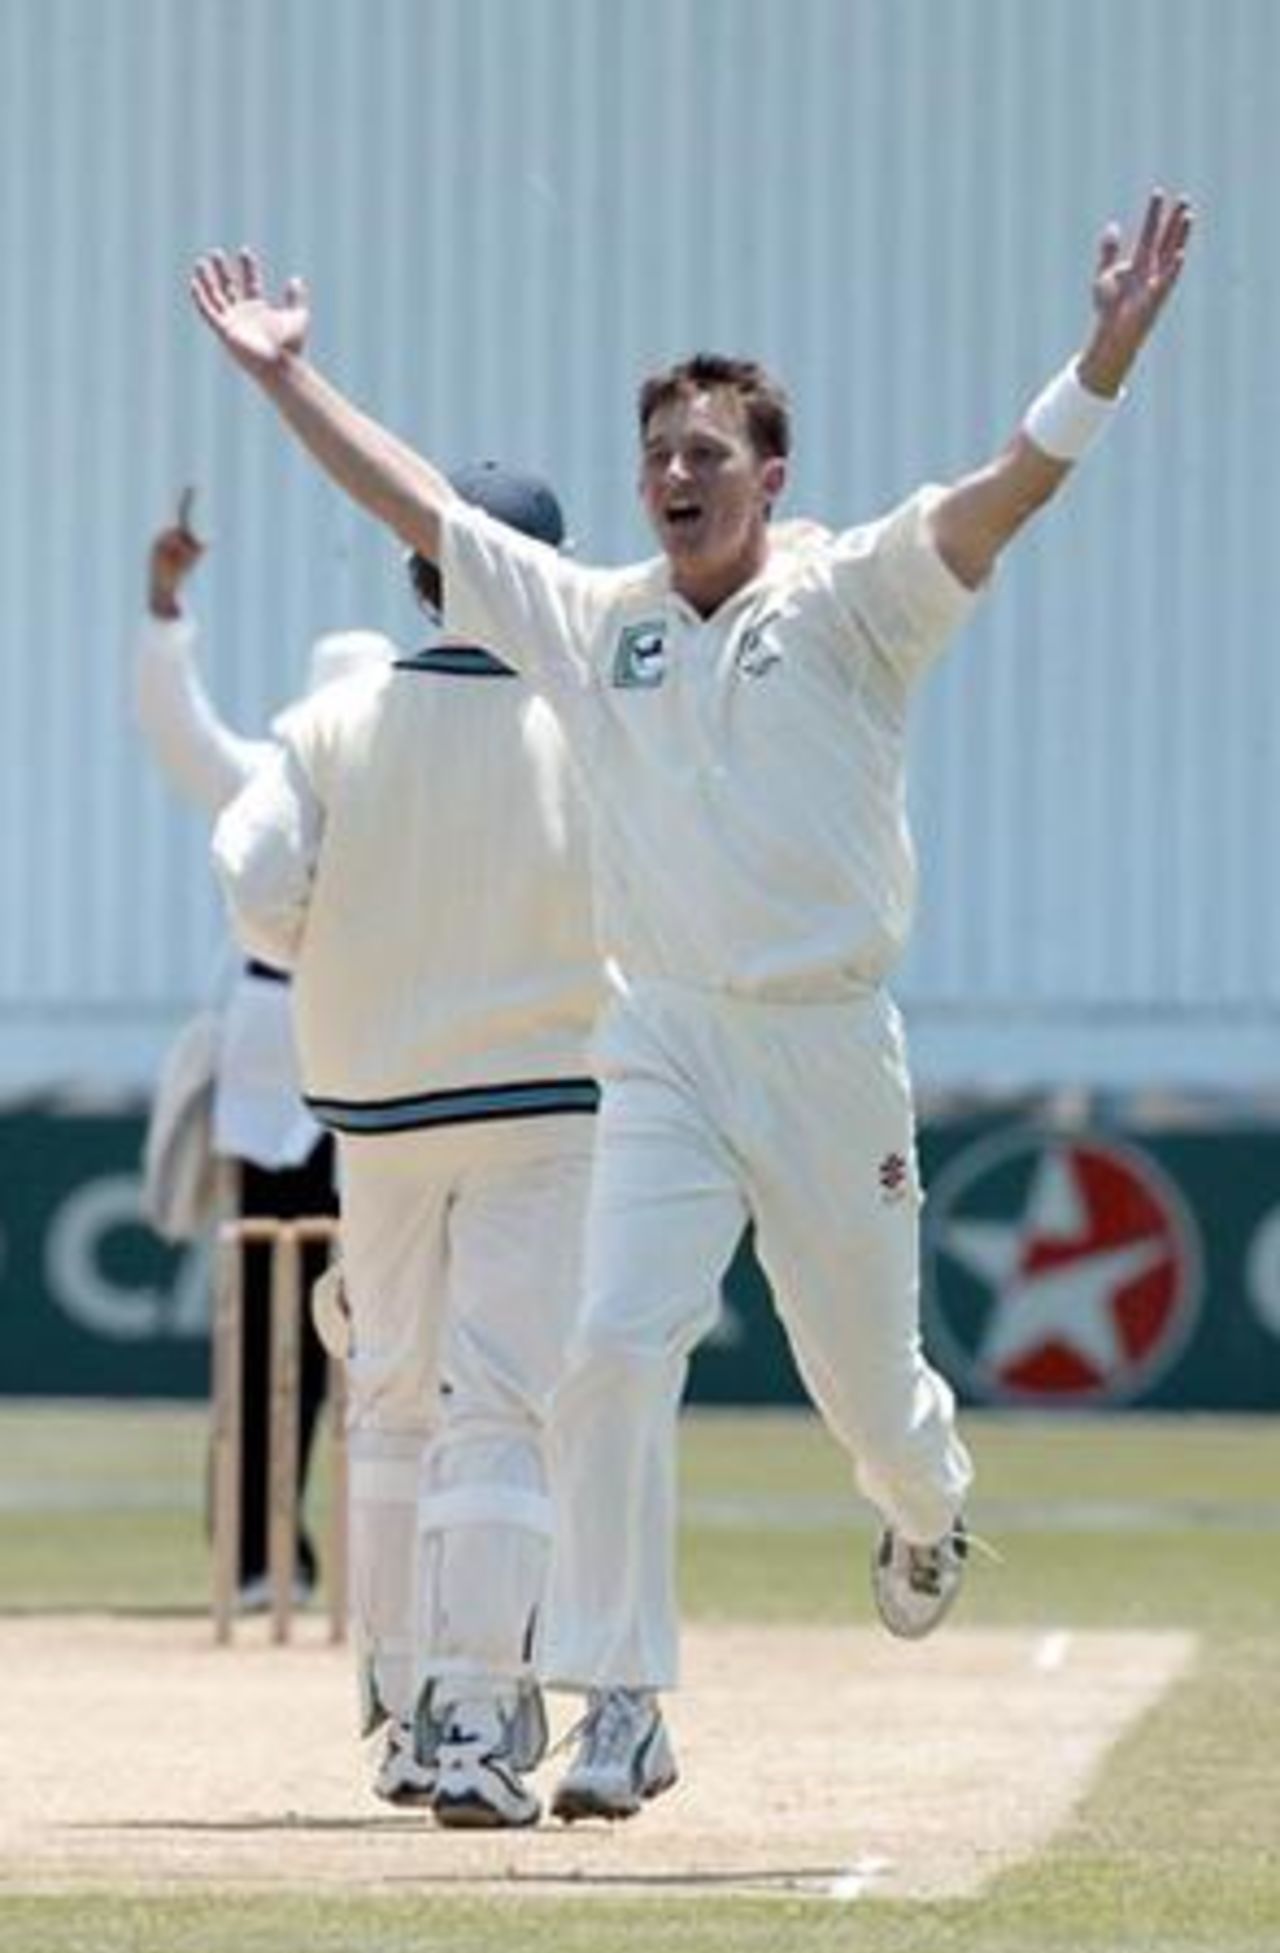 New Zealand bowler Shane Bond celebrates the dismissal of Indian batsman Sourav Ganguly, caught behind by wicket-keeper Robbie Hart for two in his second innings. 1st Test: New Zealand v India at Basin Reserve, Wellington, 12-16 December 2002 (14 December 2002).